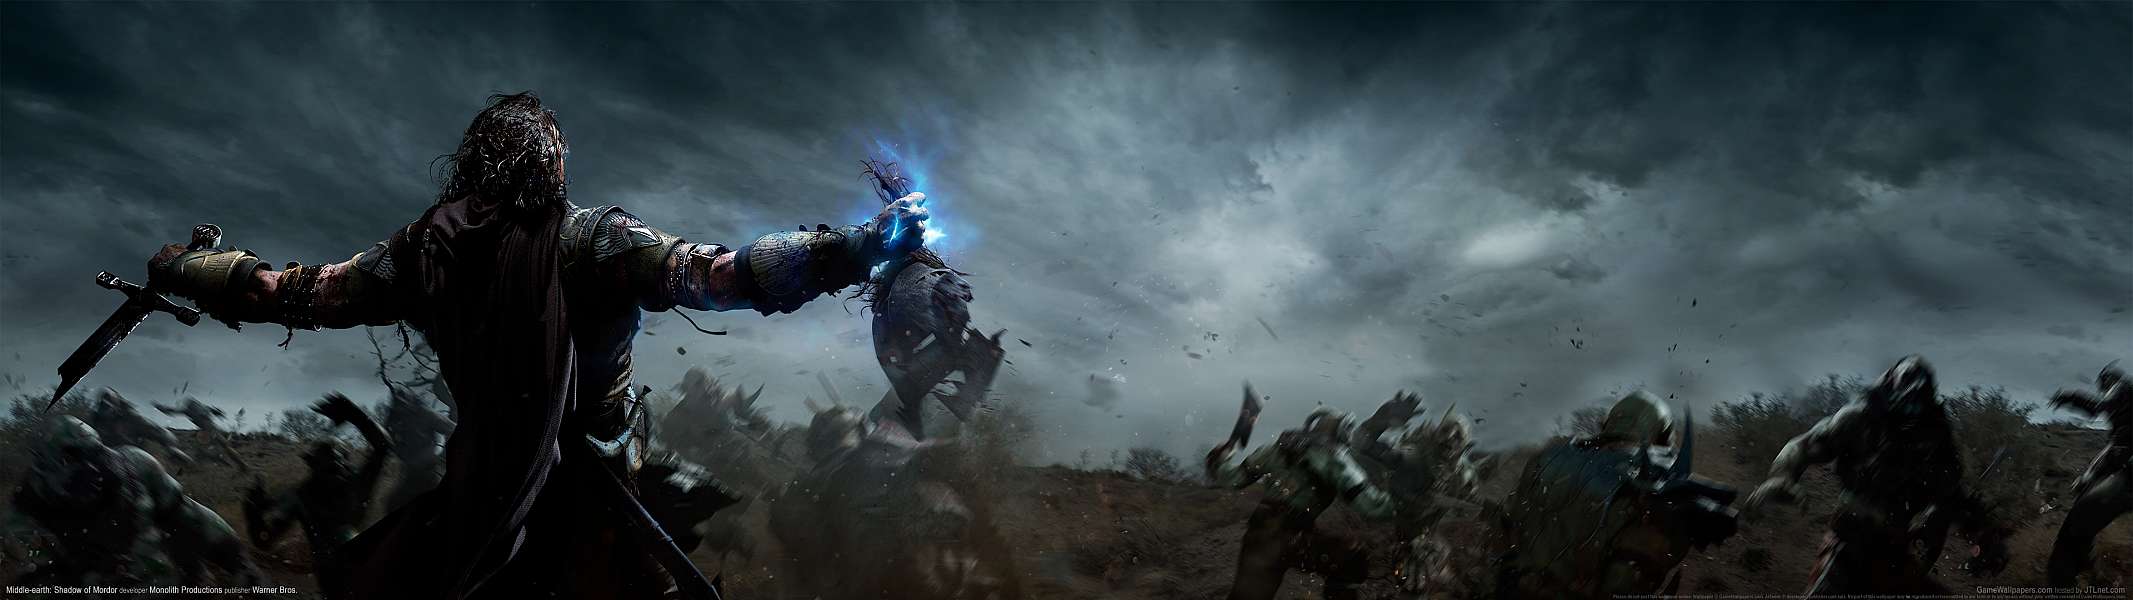 Middle-earth: Shadow of Mordor dual screen achtergrond